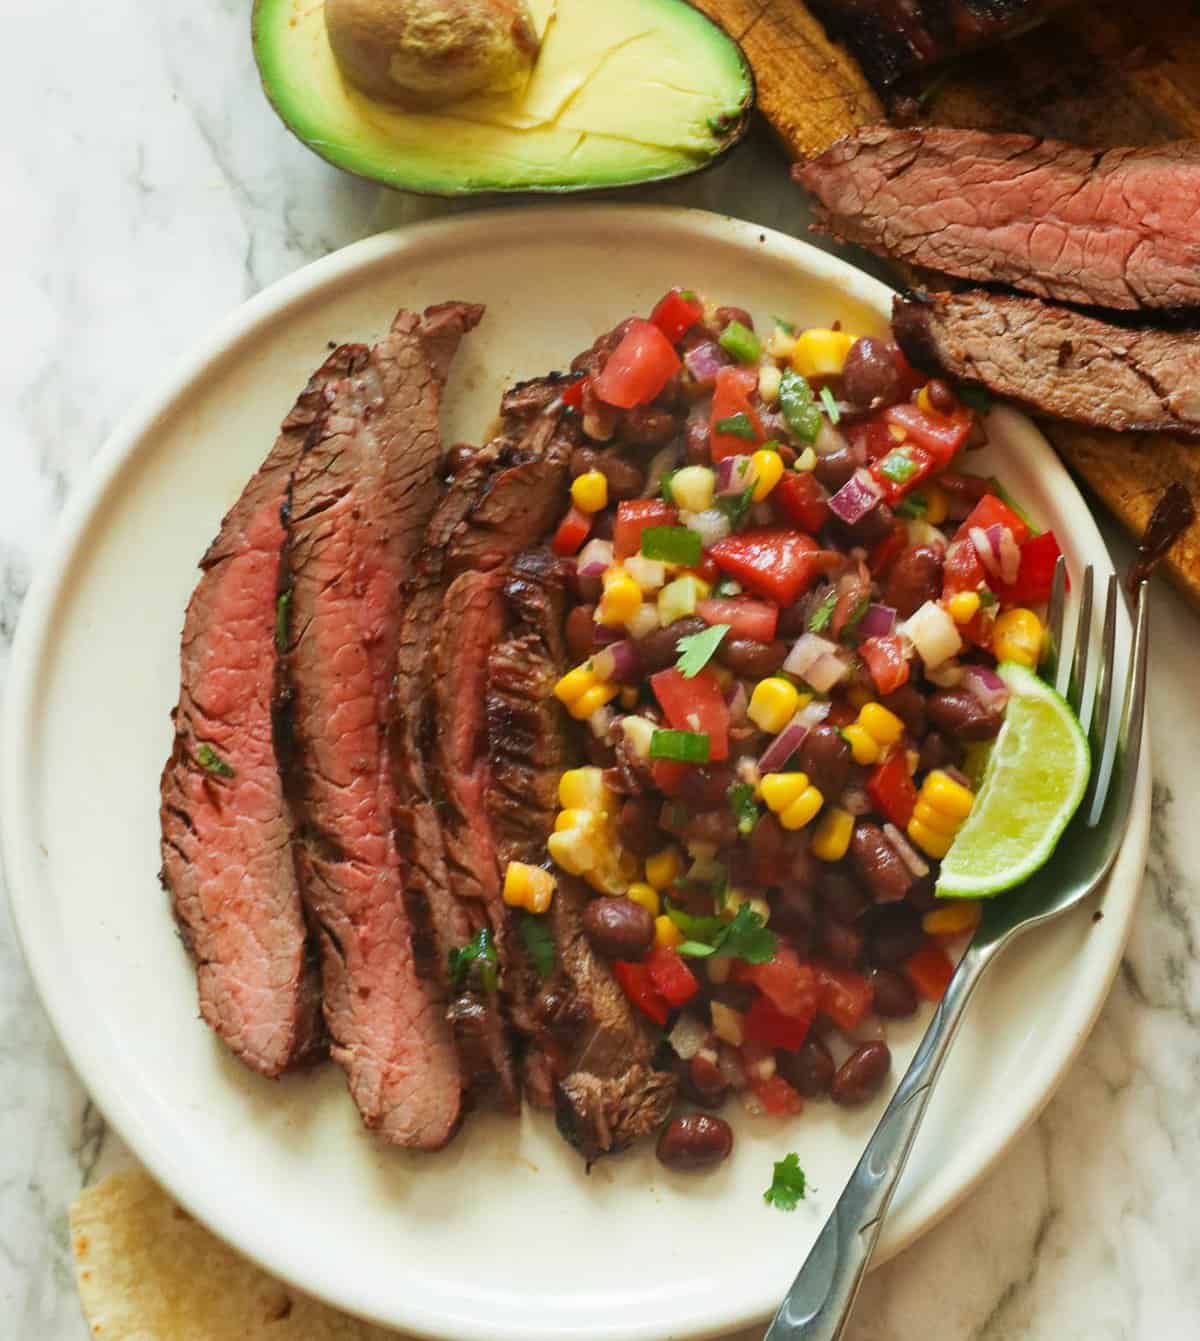 Enjoy Grilled Flank Steak with black bean and corn salad